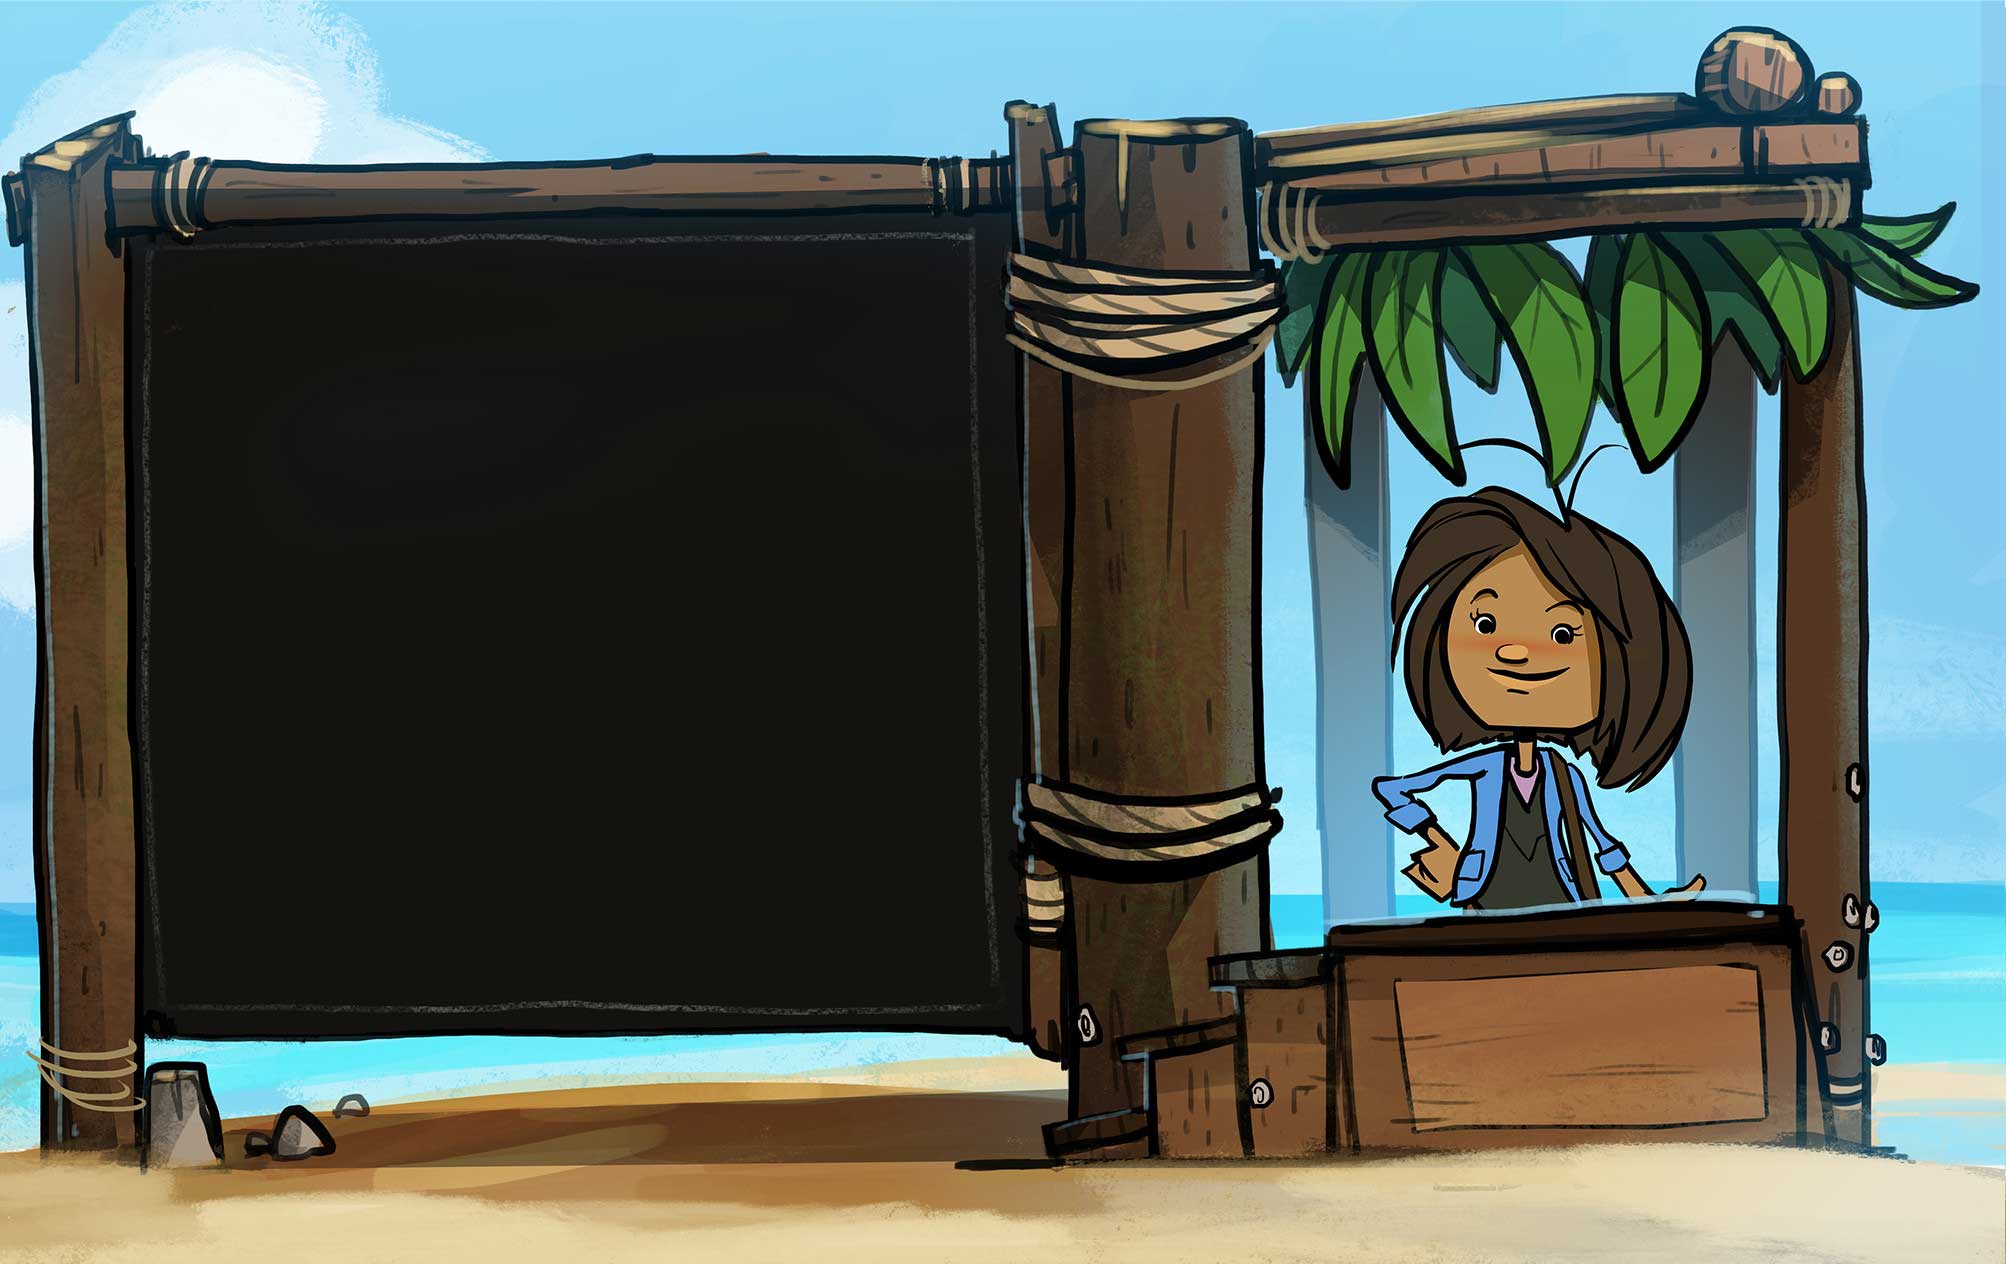 Captain sitting in a booth on the beach ready to tell you about goal setting.